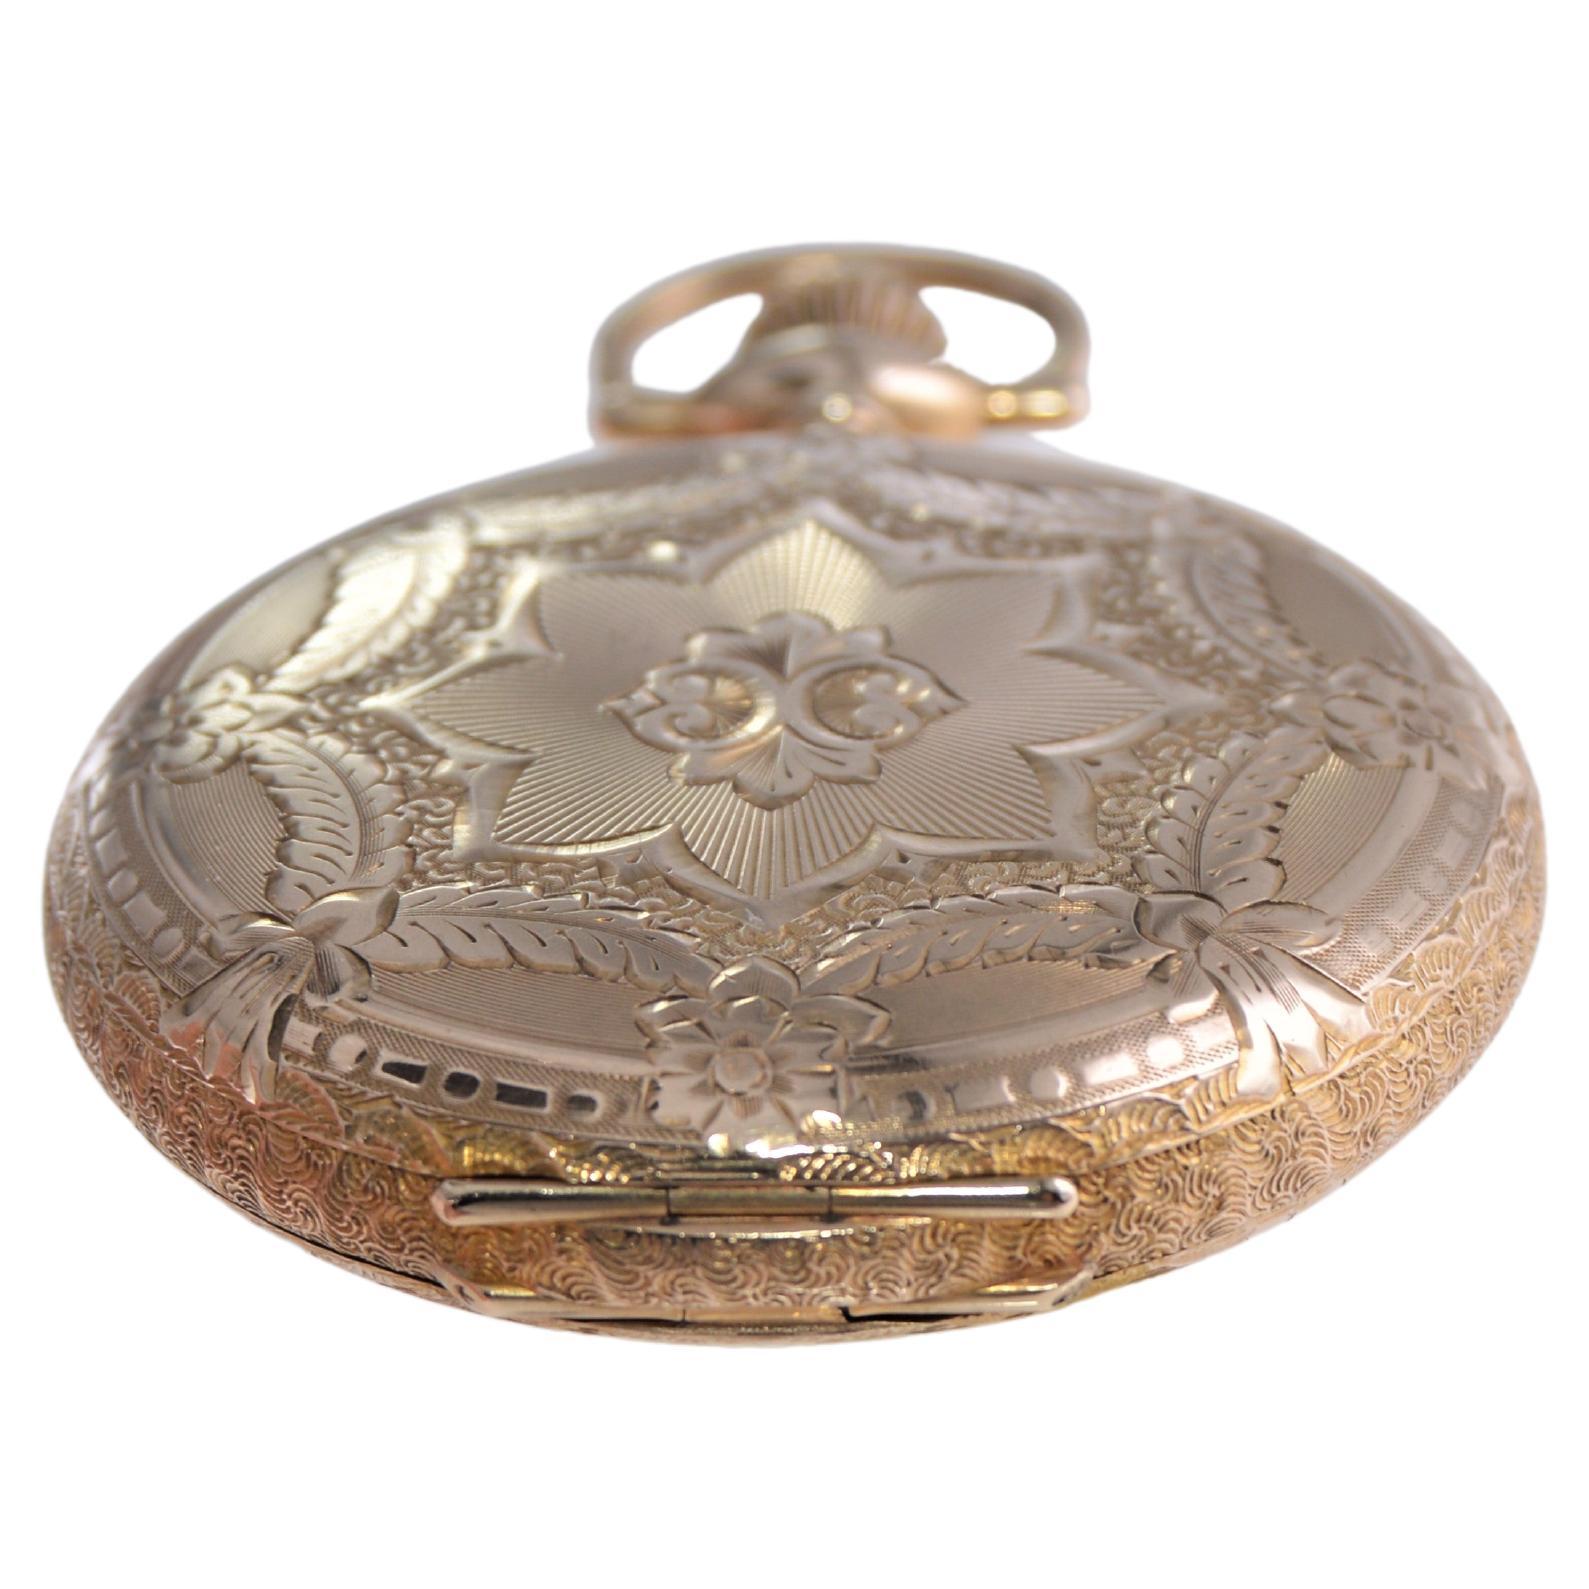 Waltham 14k Yellow Gold Hunters Cased Pocket Watch Circa 1900 Hand Engraved For Sale 2